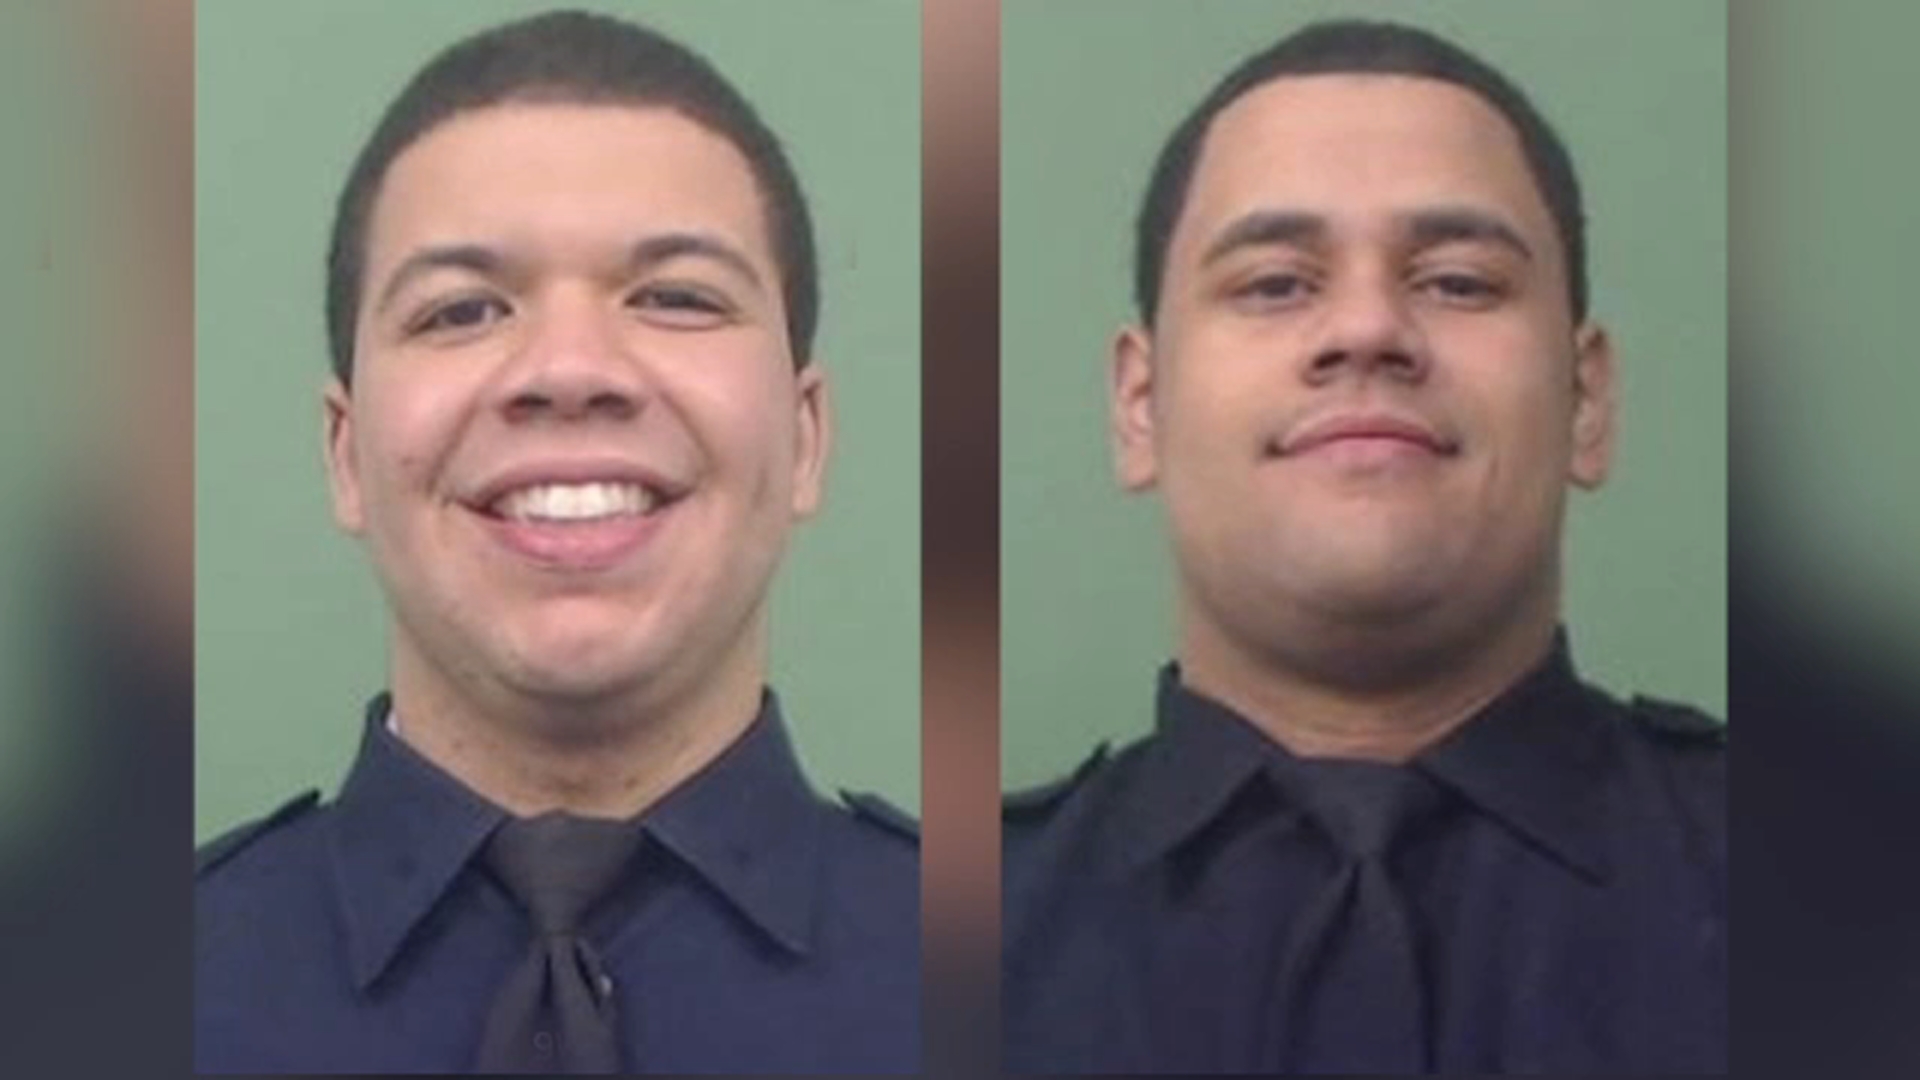 Memorial mass to take place for Jason Rivera, Wilbert Mora, NYPD officers who were fatally shot￼